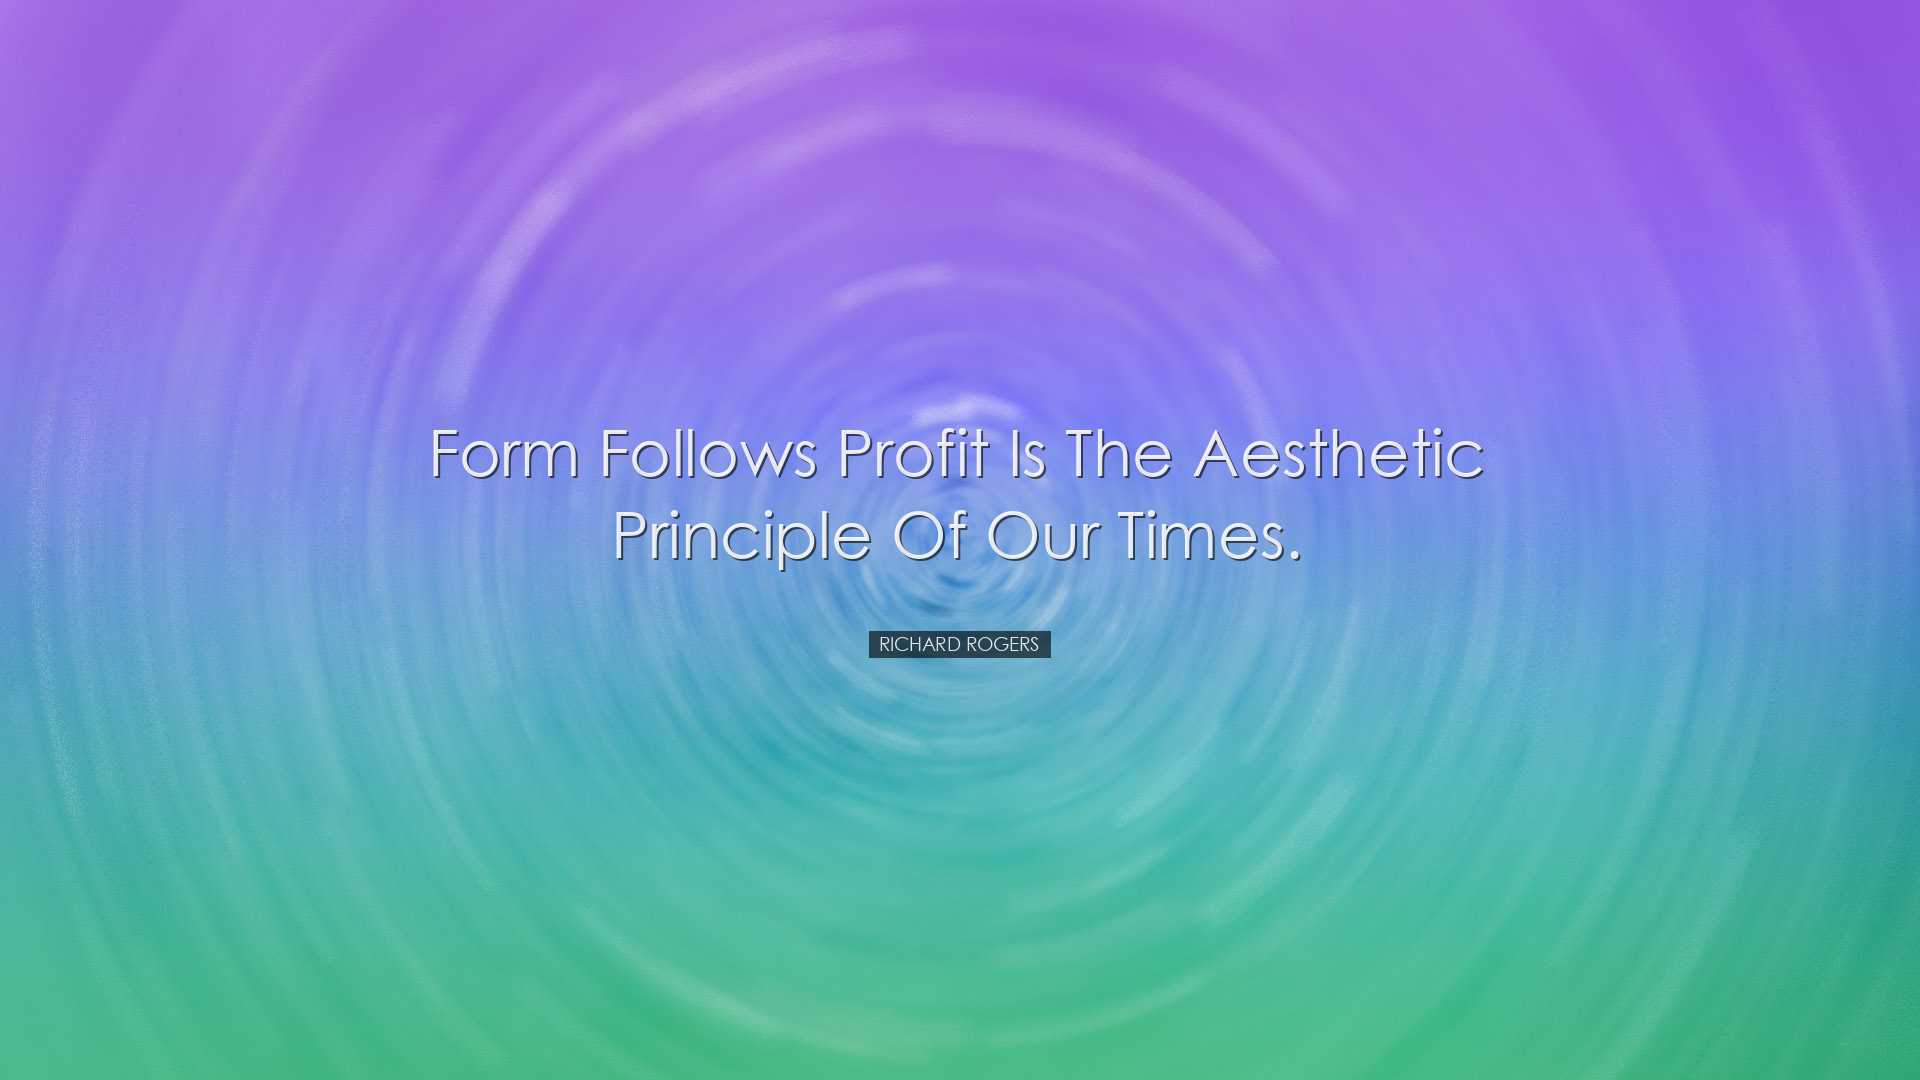 Form follows profit is the aesthetic principle of our times. - Ric